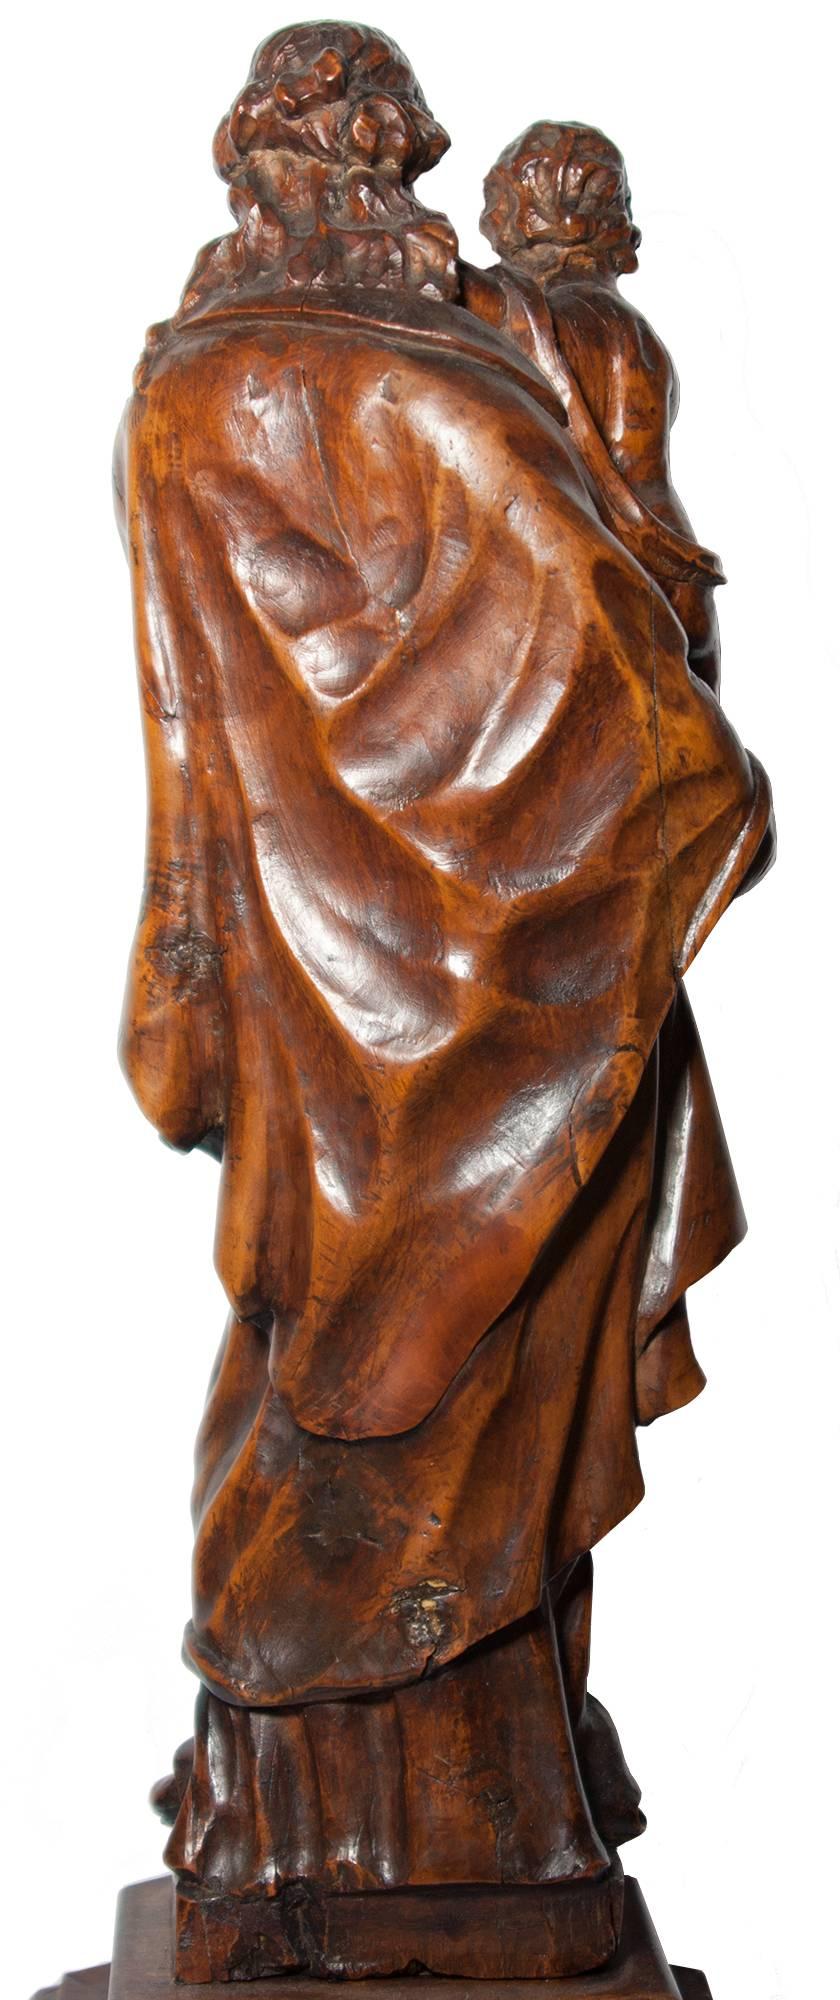 Beautiful figure of the Virgin holding the Child and the globe of royalty. The elegance of the elongated figure combined with a sophisticated drapery show a work of the Flemish School in the late XVII th, early XVIII th century. Carved in hardwood,